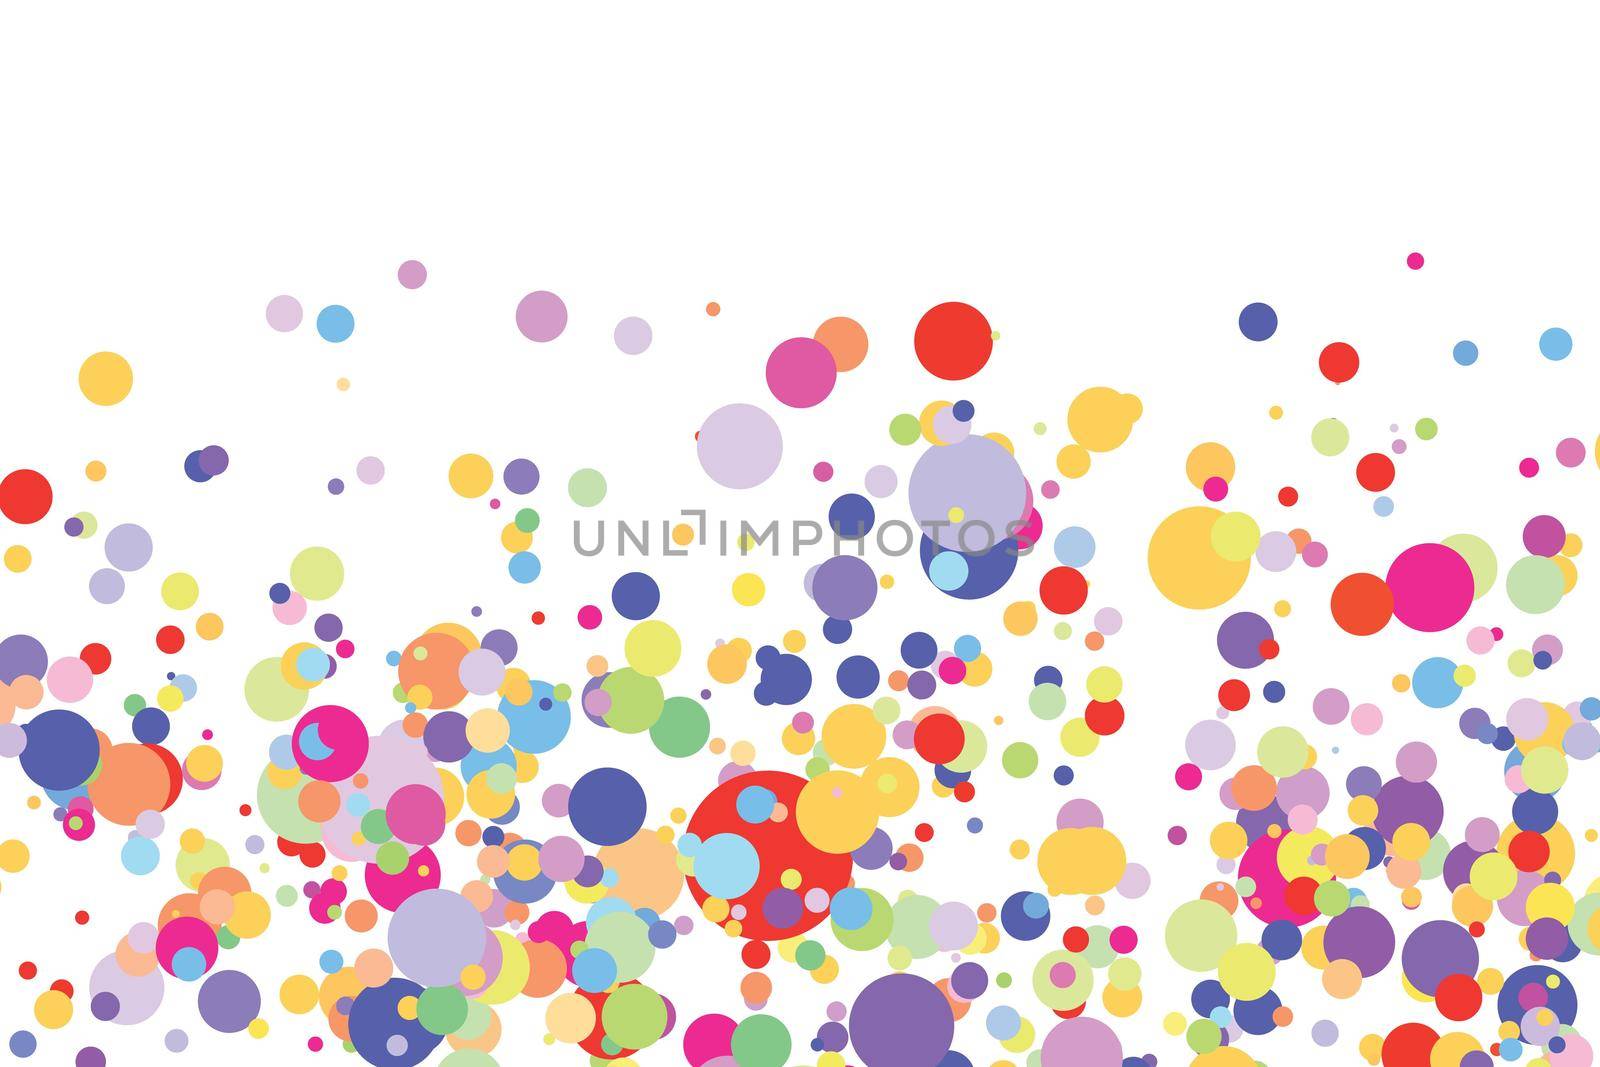 Light multicolor background, colorful vector texture with circles. Splash effect banner. Glitter silver dot abstract illustration with blurred drops of rain. Pattern for web page, banner,poster, card by allaku